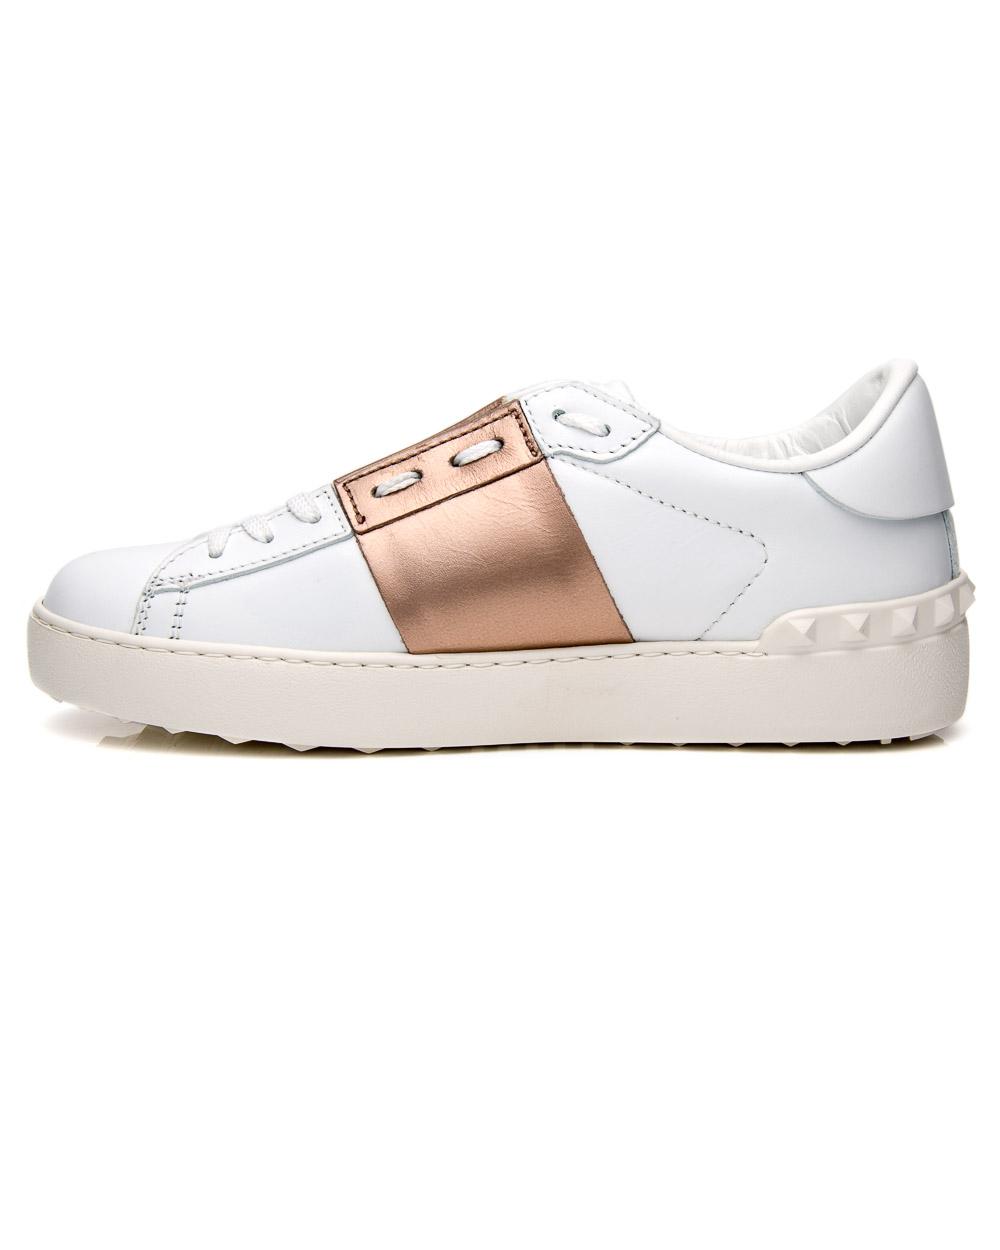 Lyst - Valentino Open Metallic Leather Sneakers in White - Save 68%